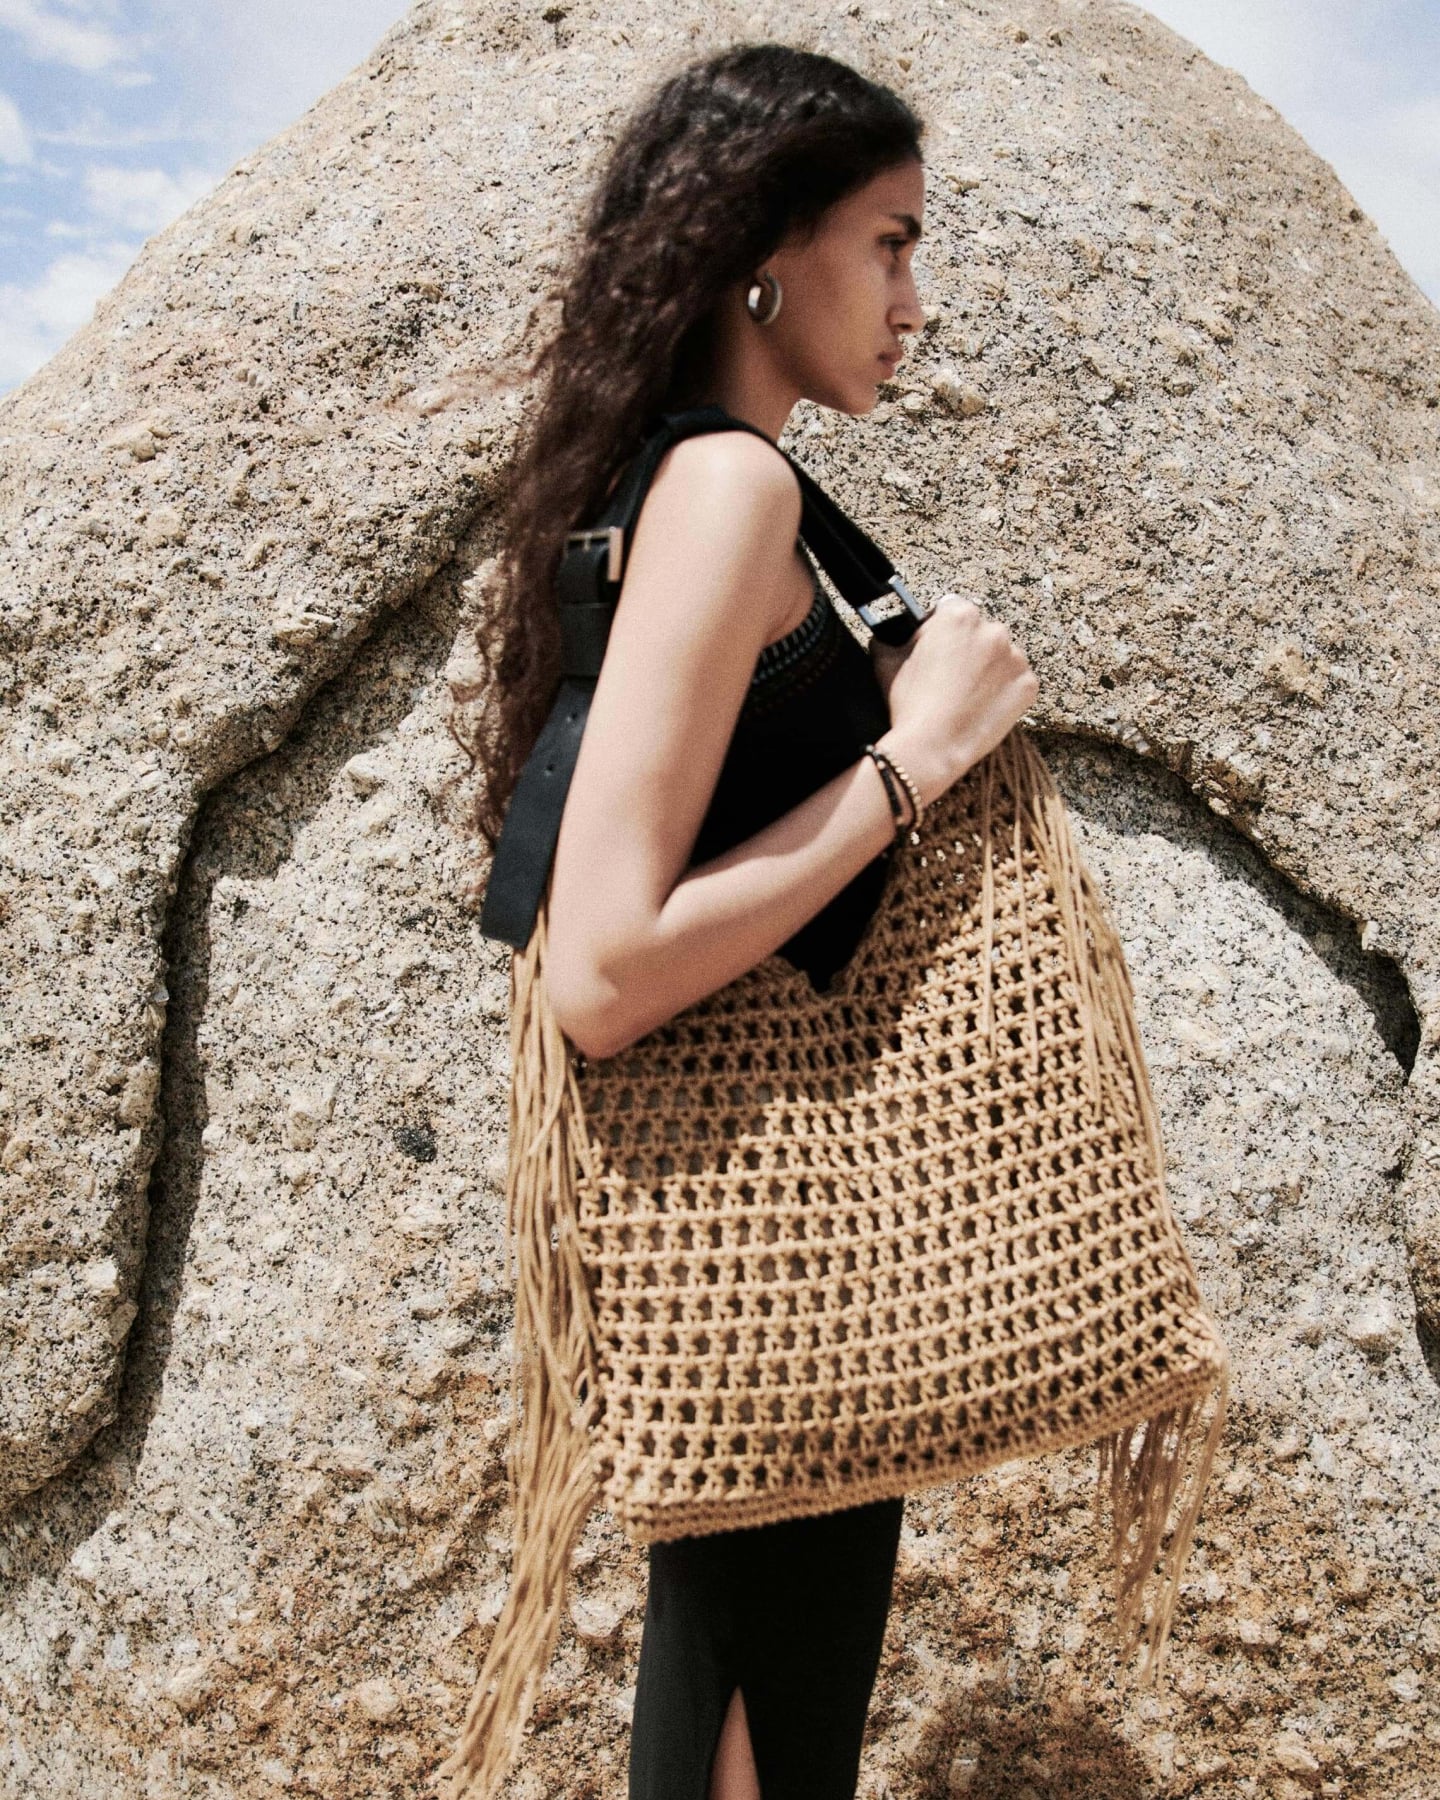 Woman standing in front of a huge rock wearing a black dress and holding a crochet bag.